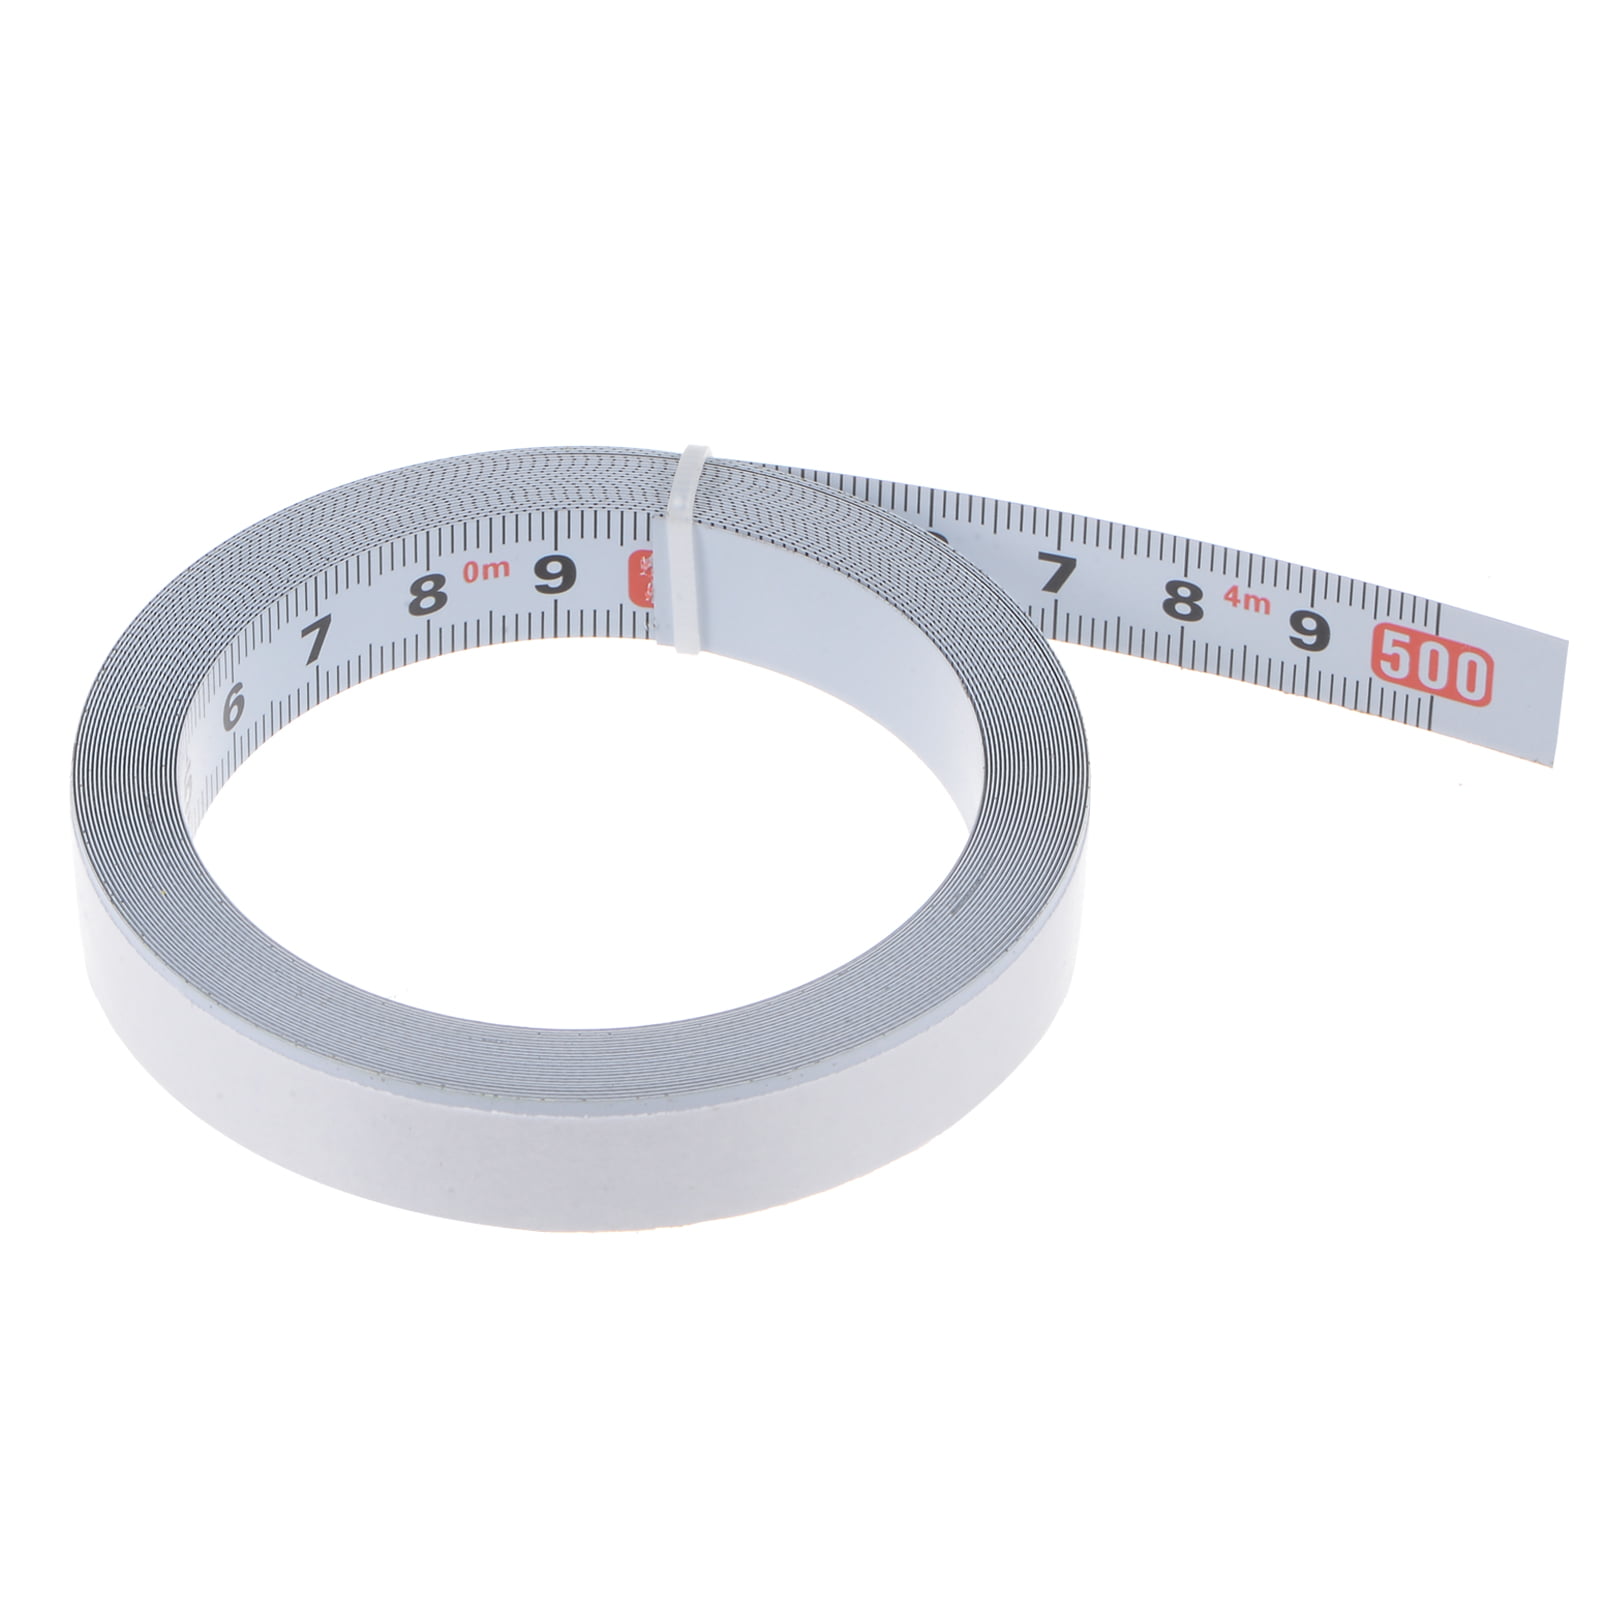 Self Adhesive Tape Measure 500cm Metric Left to Right Reading Measuring  Tape Steel Sticky Ruler, White 